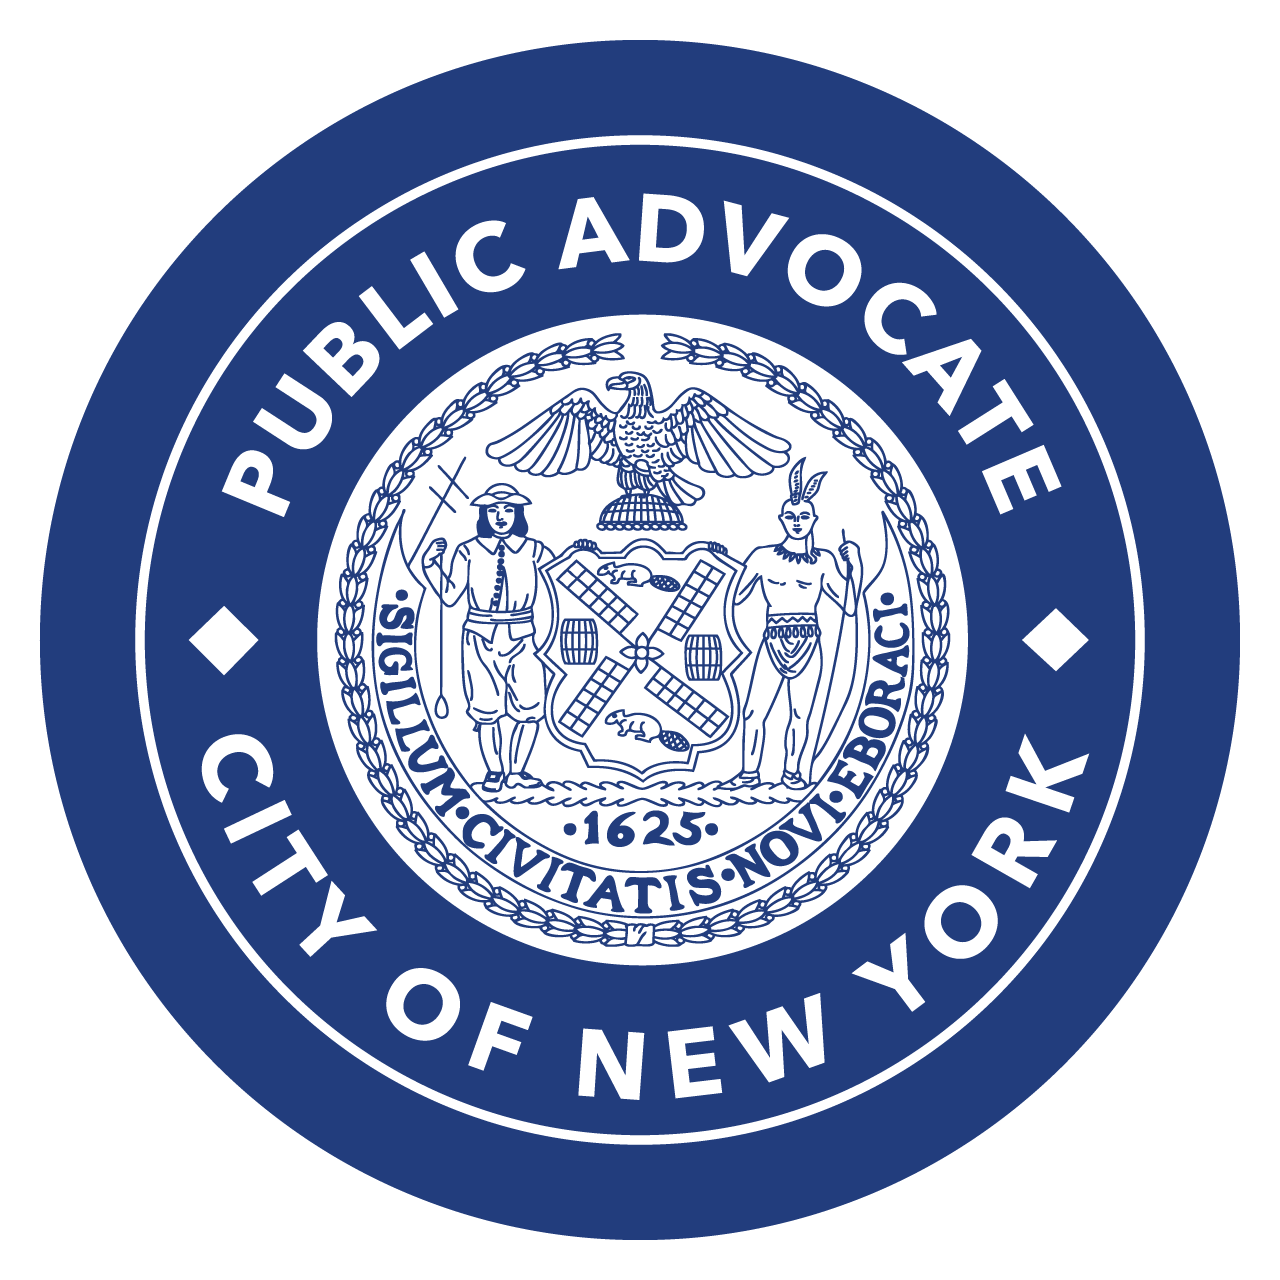 The City of New York seal encased in a larger blue circle with the words "Public Advocate: City of New York"